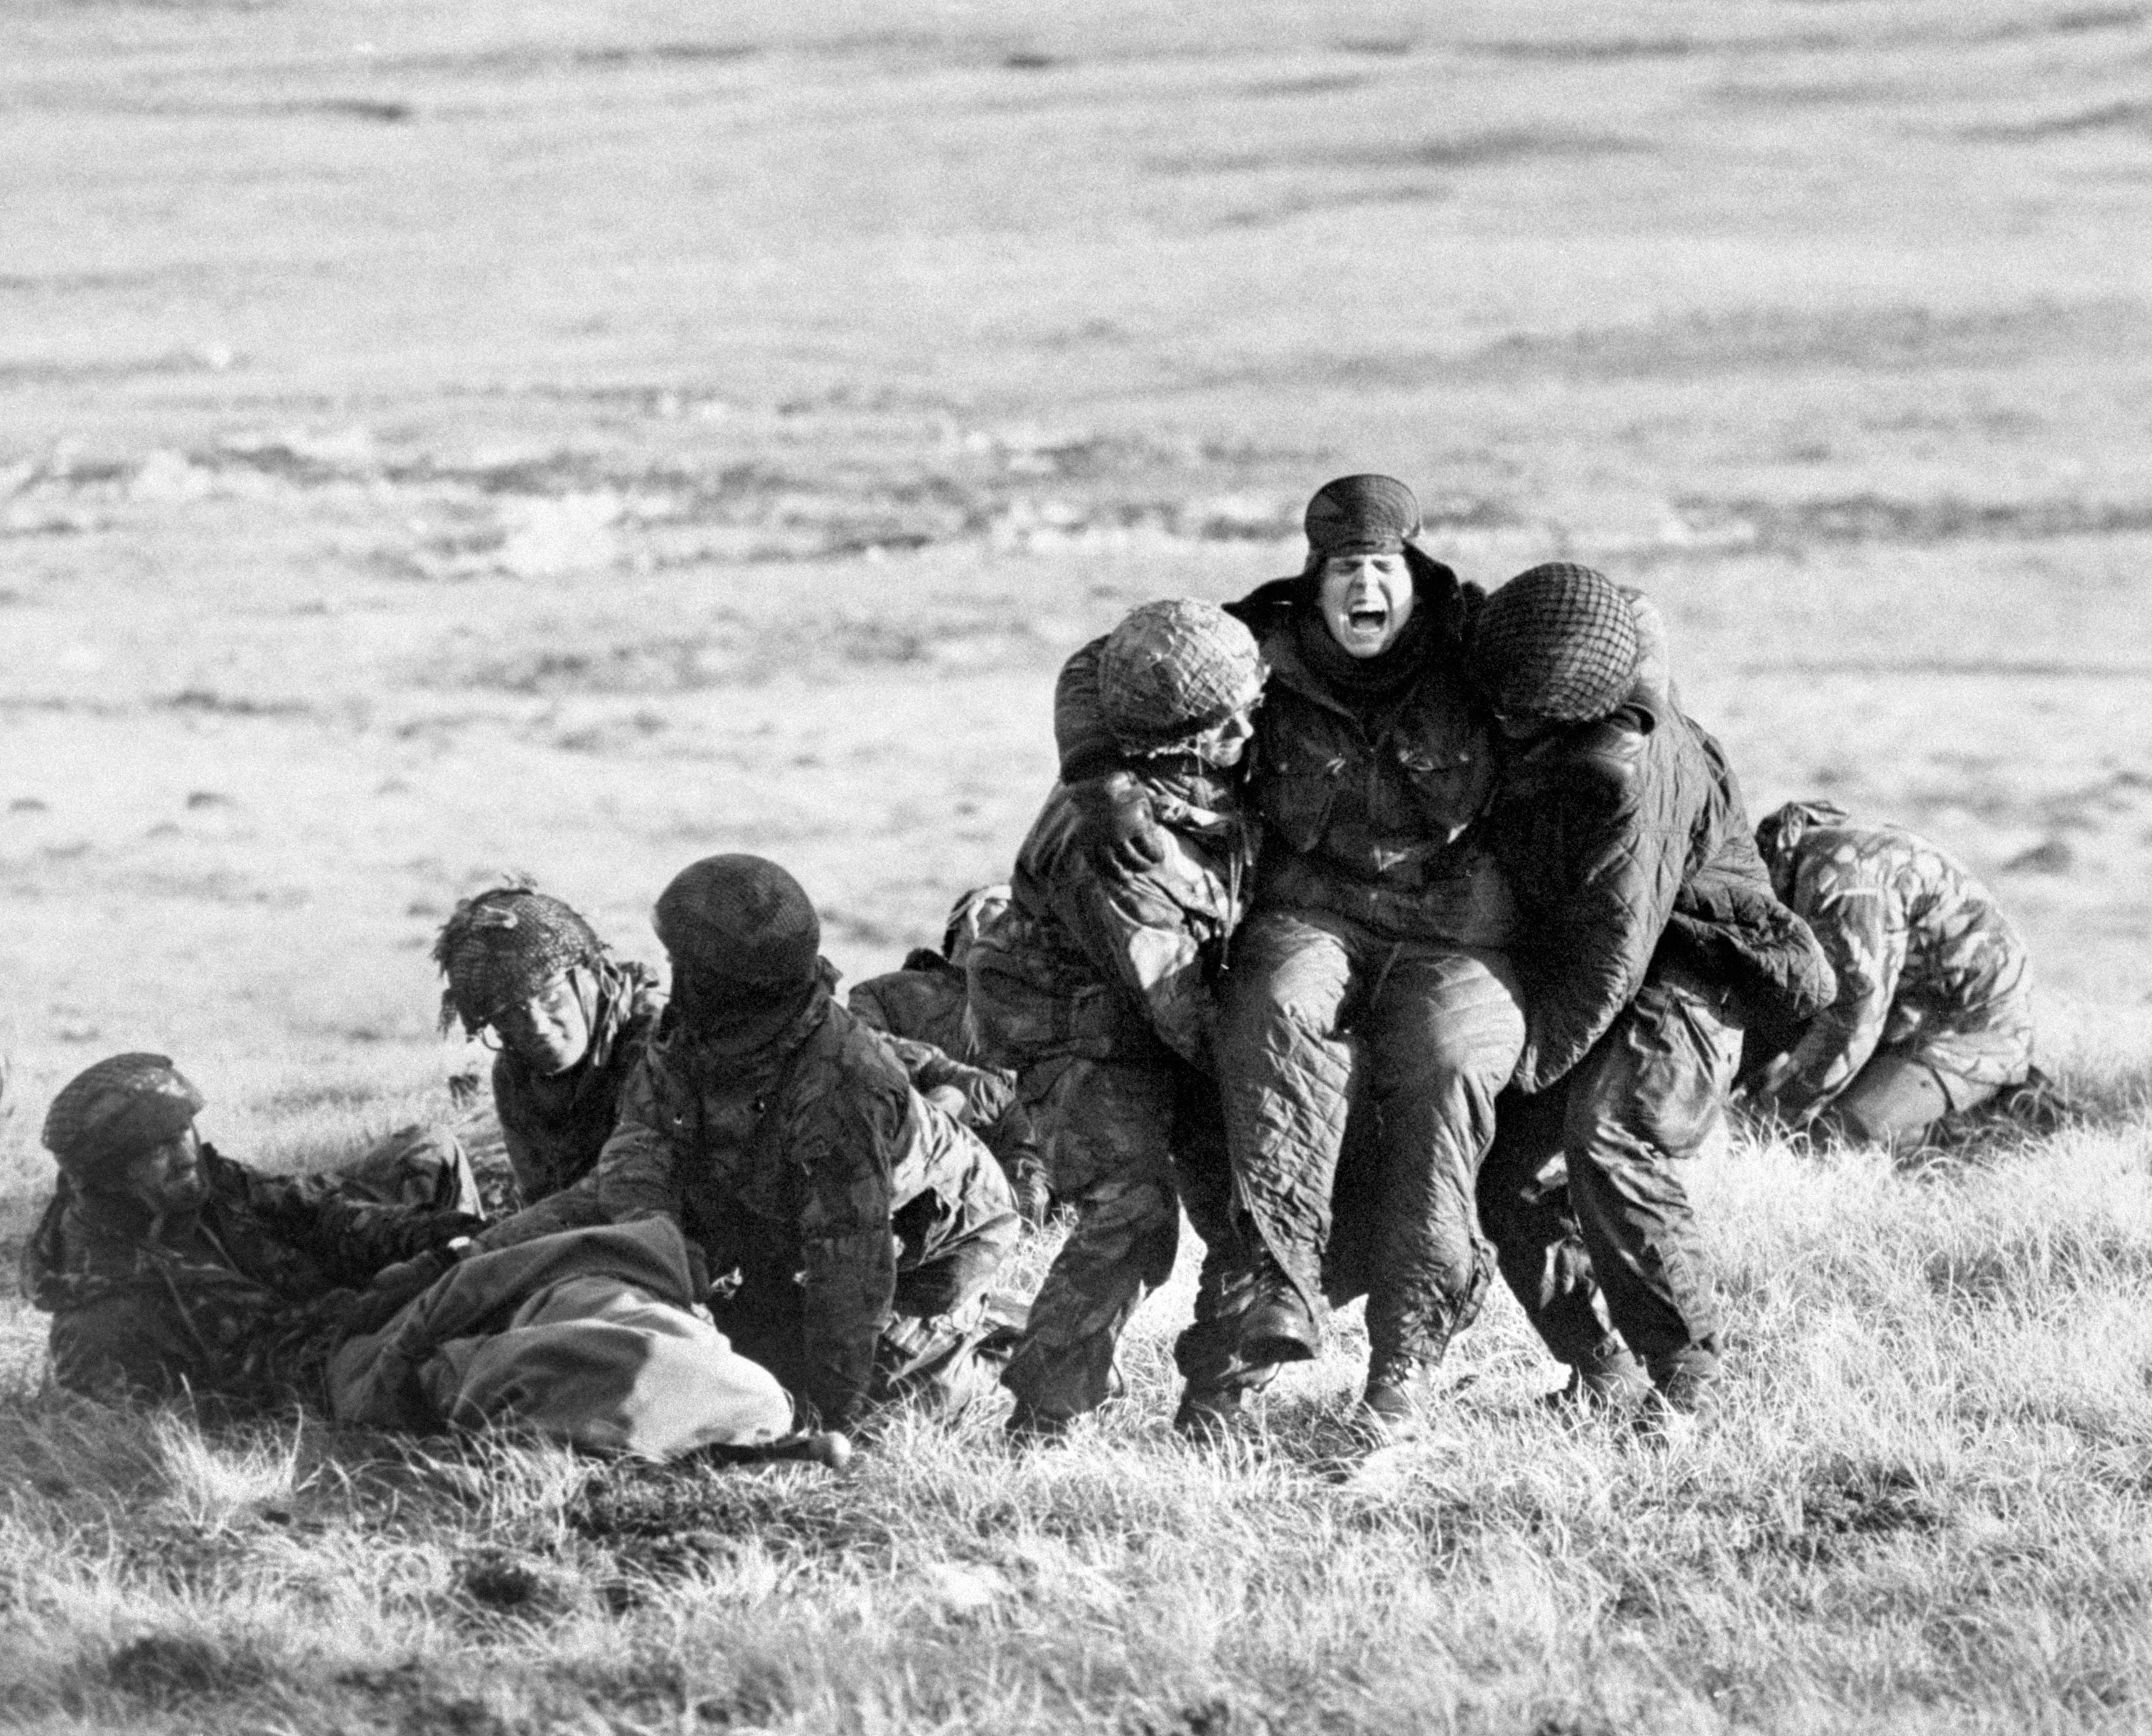 British paratroopers carrying out emergency medical treatment on wounded comrades whilst under fire on Mount Longdon during the Falklands campaign in 1982 PA Photo